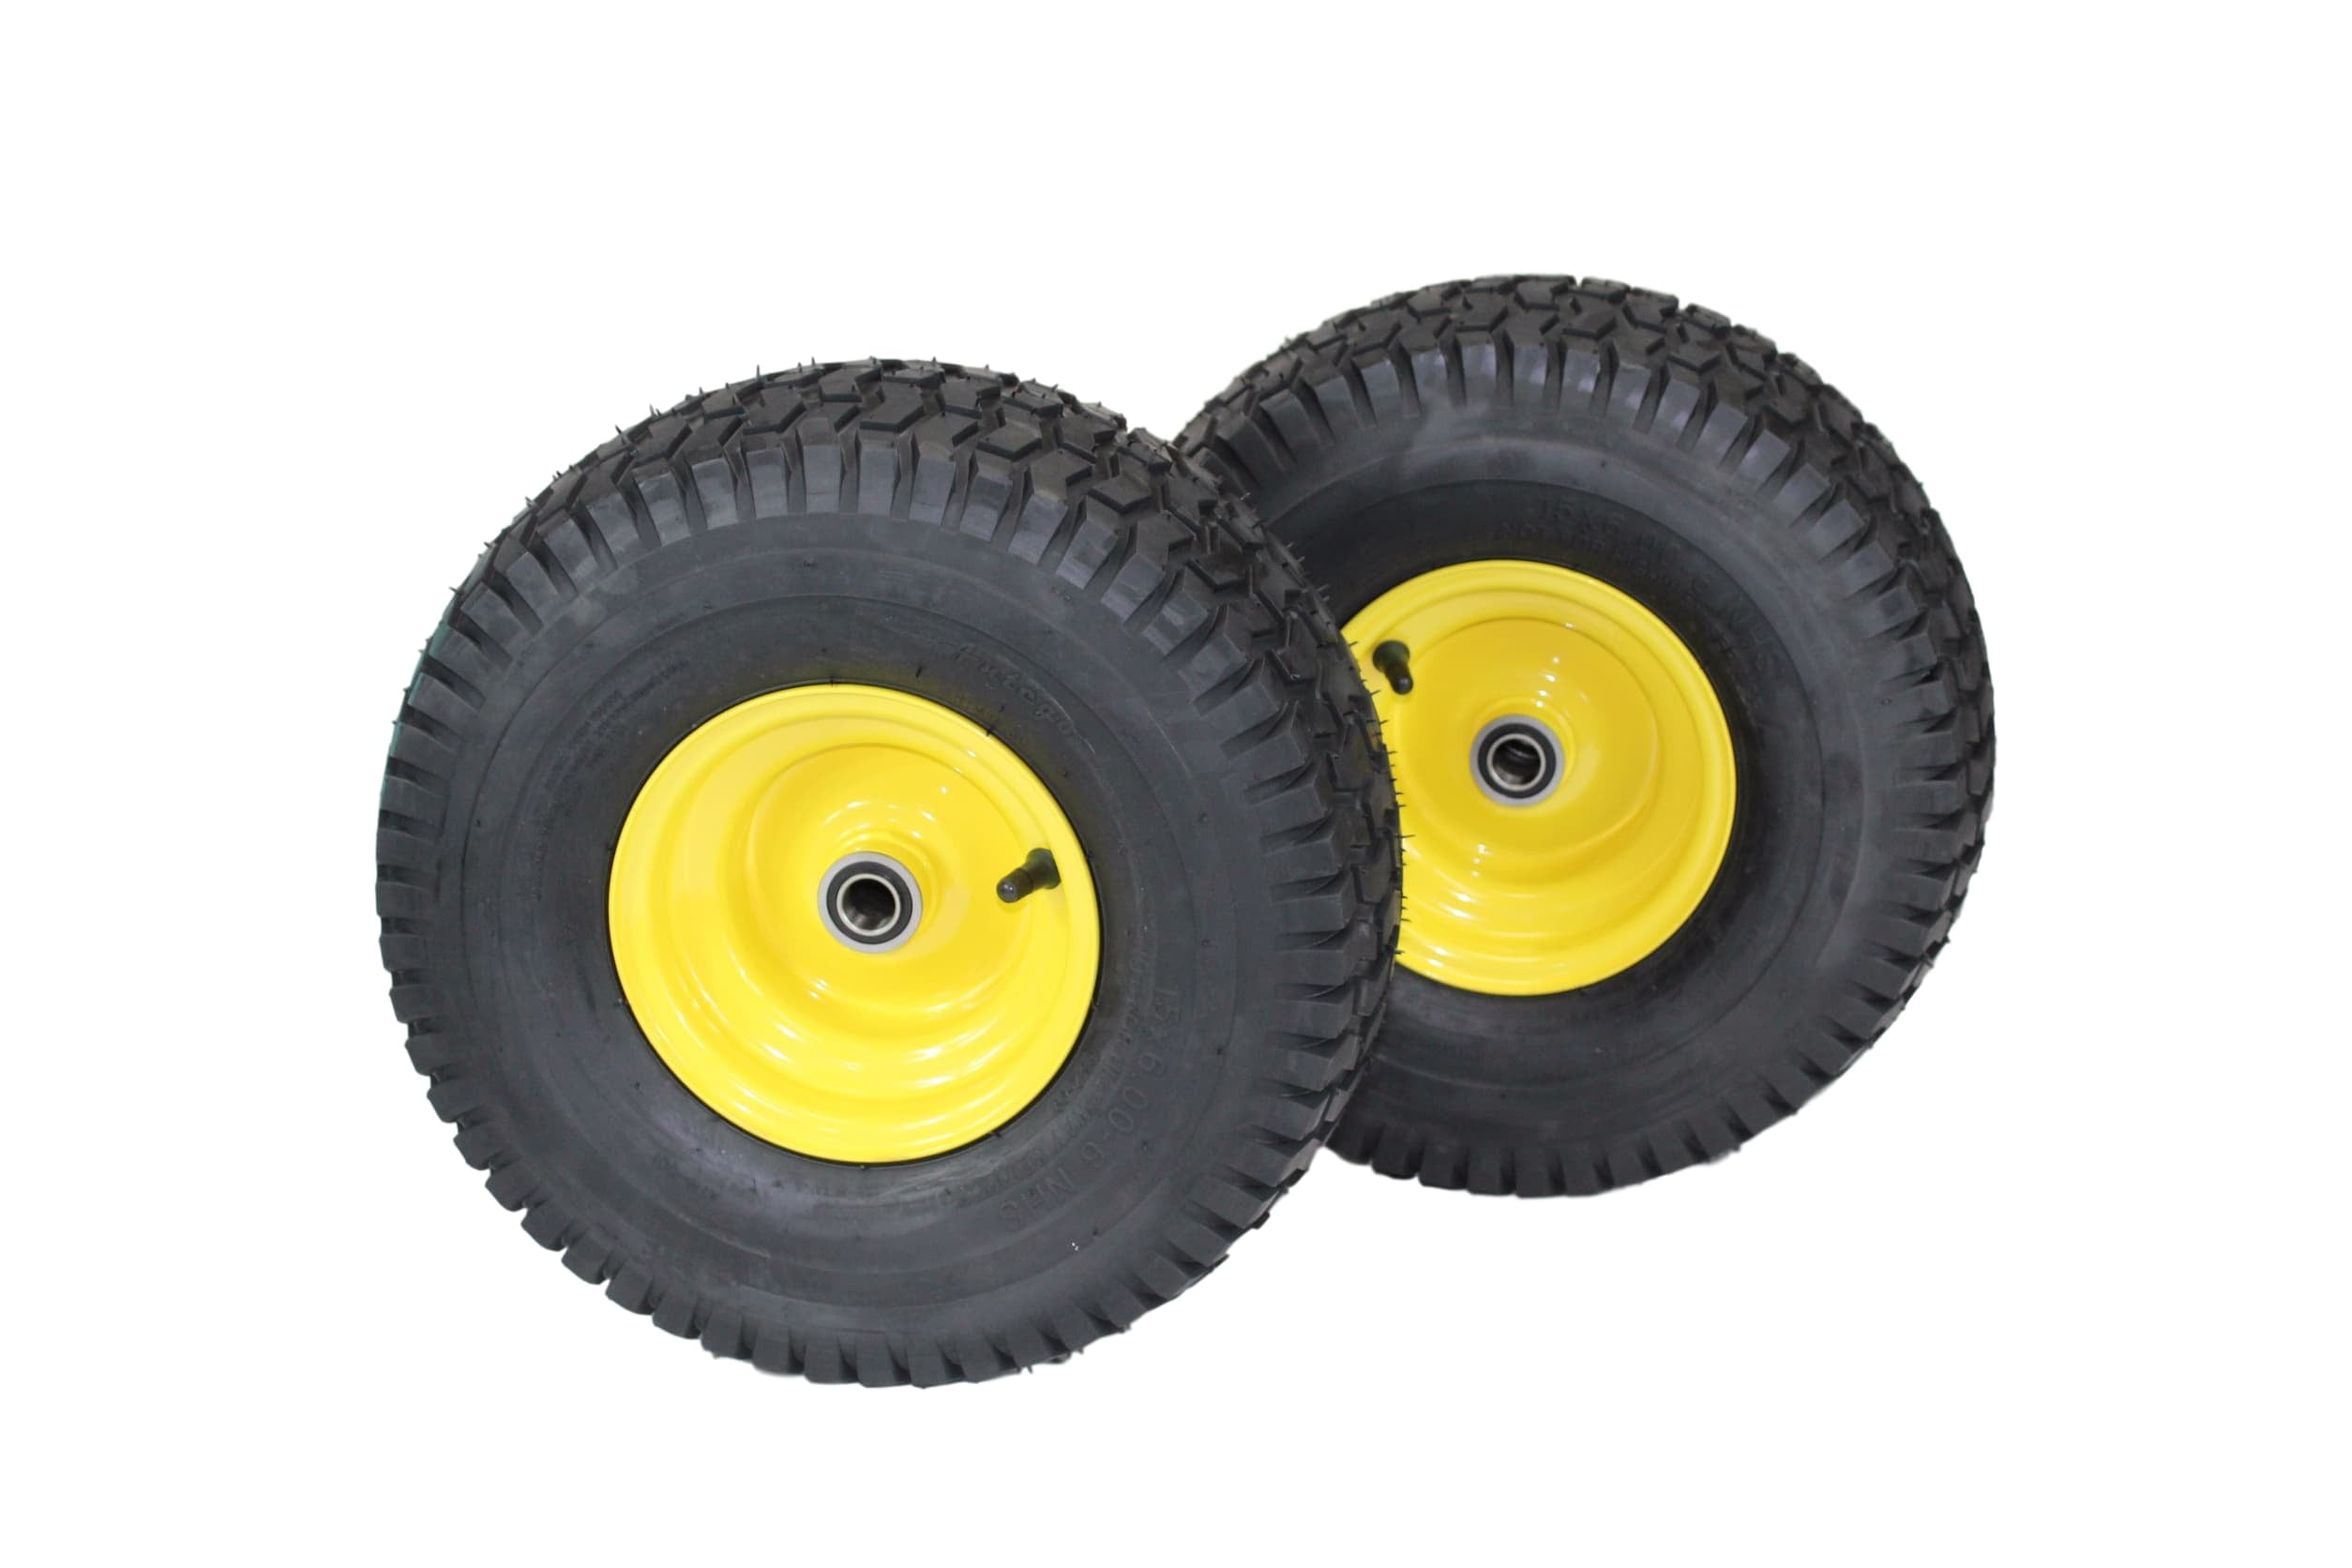 15x6.00-6 Tires & Wheels 4 Ply for Lawn & Garden Mower Turf Tires .75 Bearing ATW-003 Set of 2